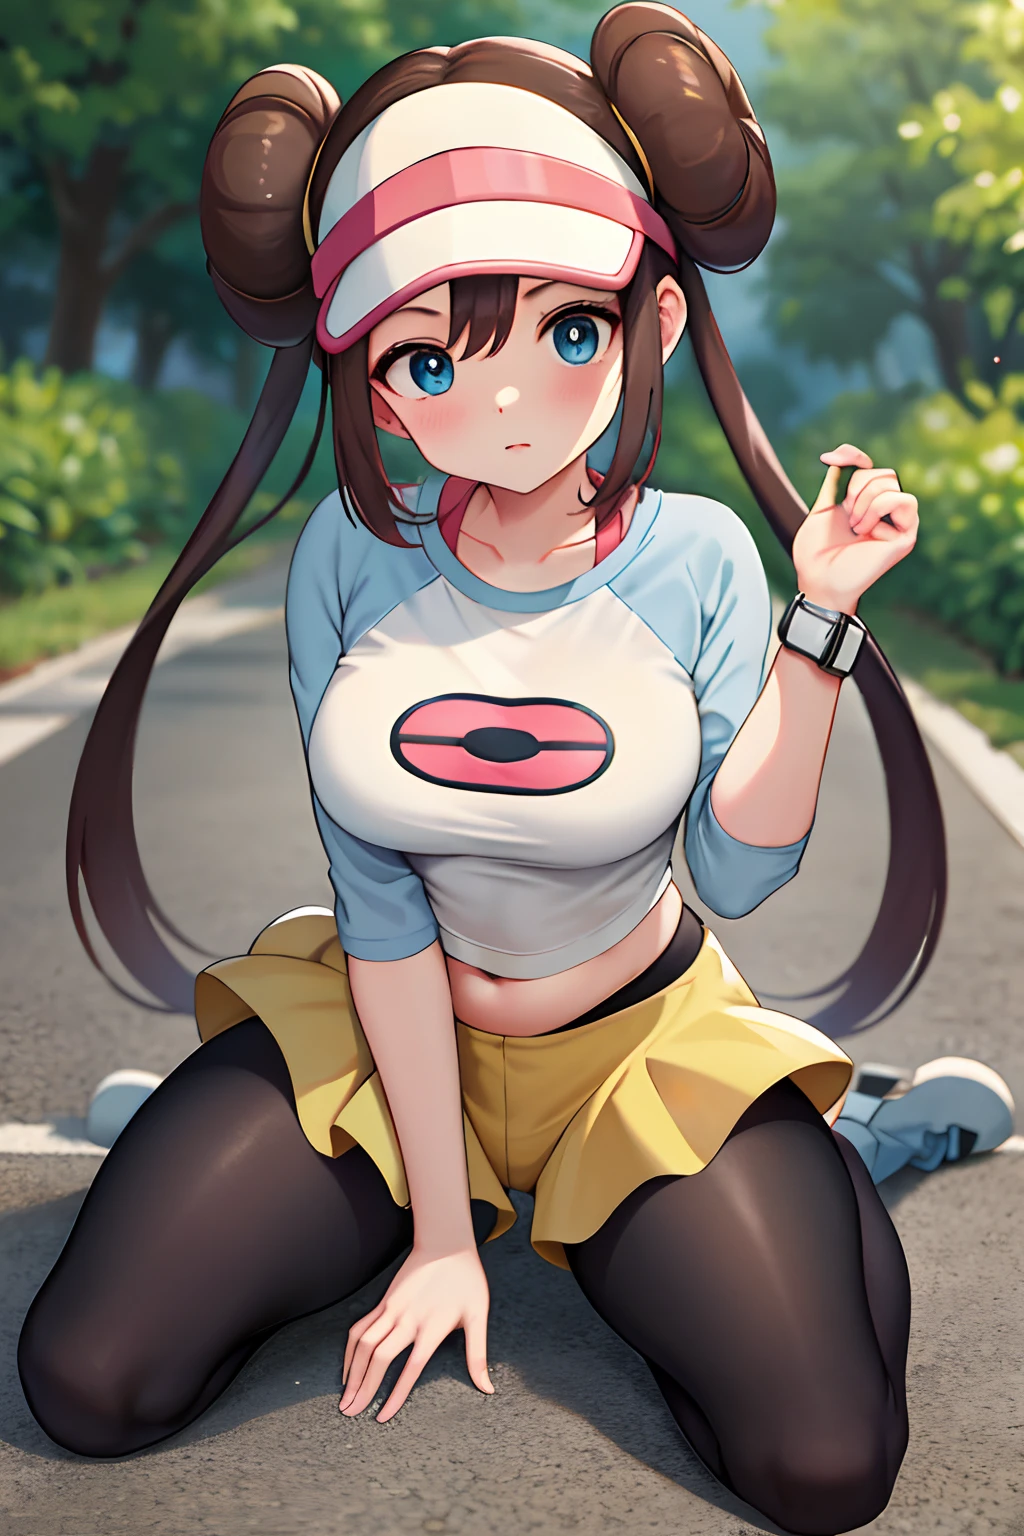 ​masterpiece, top-quality, hight resolution, RO1, Hair buns, blue eyess, Twin-tailed, Visor Cap, panthyhose, raglan sleeves, Yellow shorts, The shirt, Pink ribbon, Watches, Slouched, gym, crouching down, 30 denier soft-touch comfort tights, see -through, crouching down, Open legs, thighs thighs thighs thighs, Attractive thighs,large full breasts、red blush、full body Esbian、appealing breasts、Fluffy clotheetamorphosis、breastsout、teats、sexy tummy、big butts、teats、Large Thigh、Feminine body、Skirt combing、Pants to show、The face you're looking for、Bras to show、sole、Rear view、